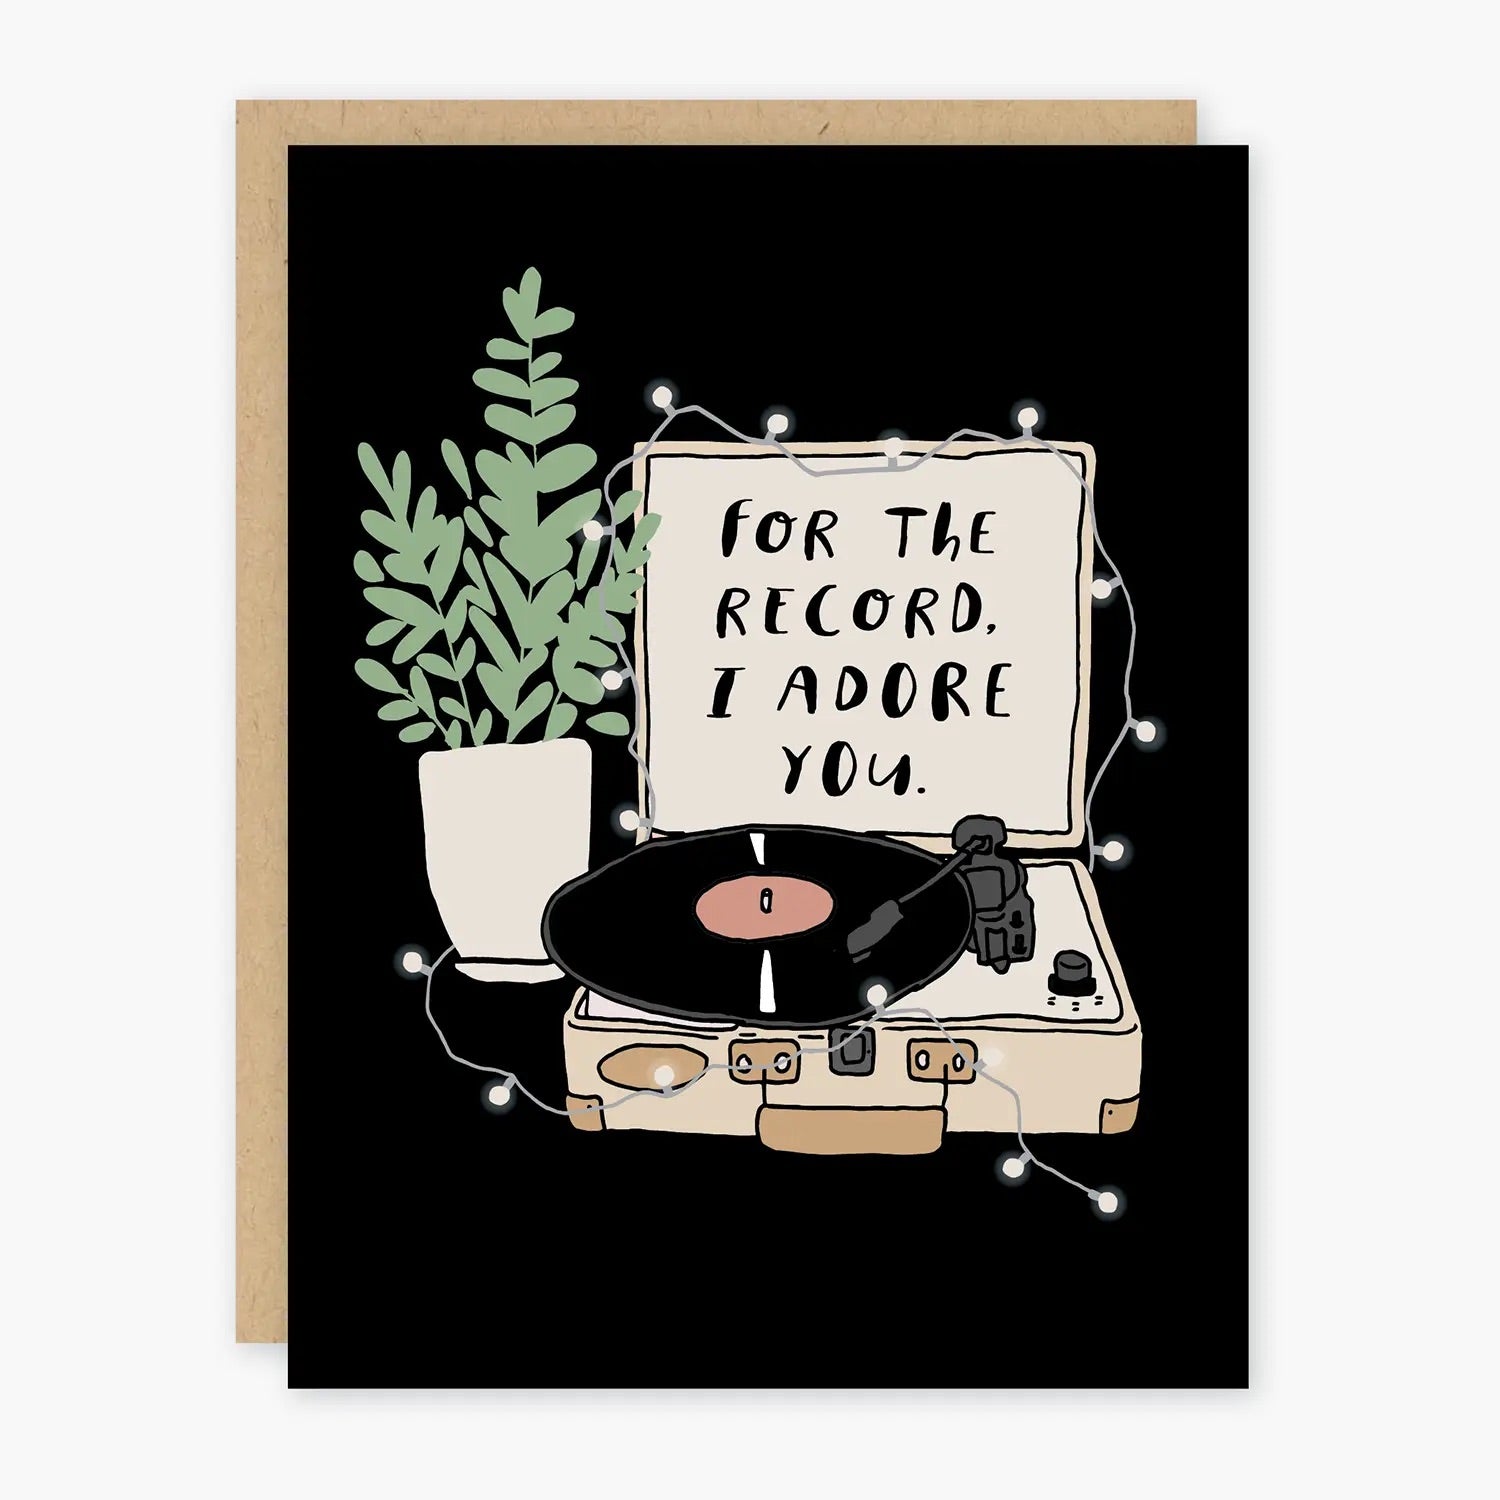 Black greeting card with record player, plant, and sign that says "for the record, I adore you." Card is white inside.